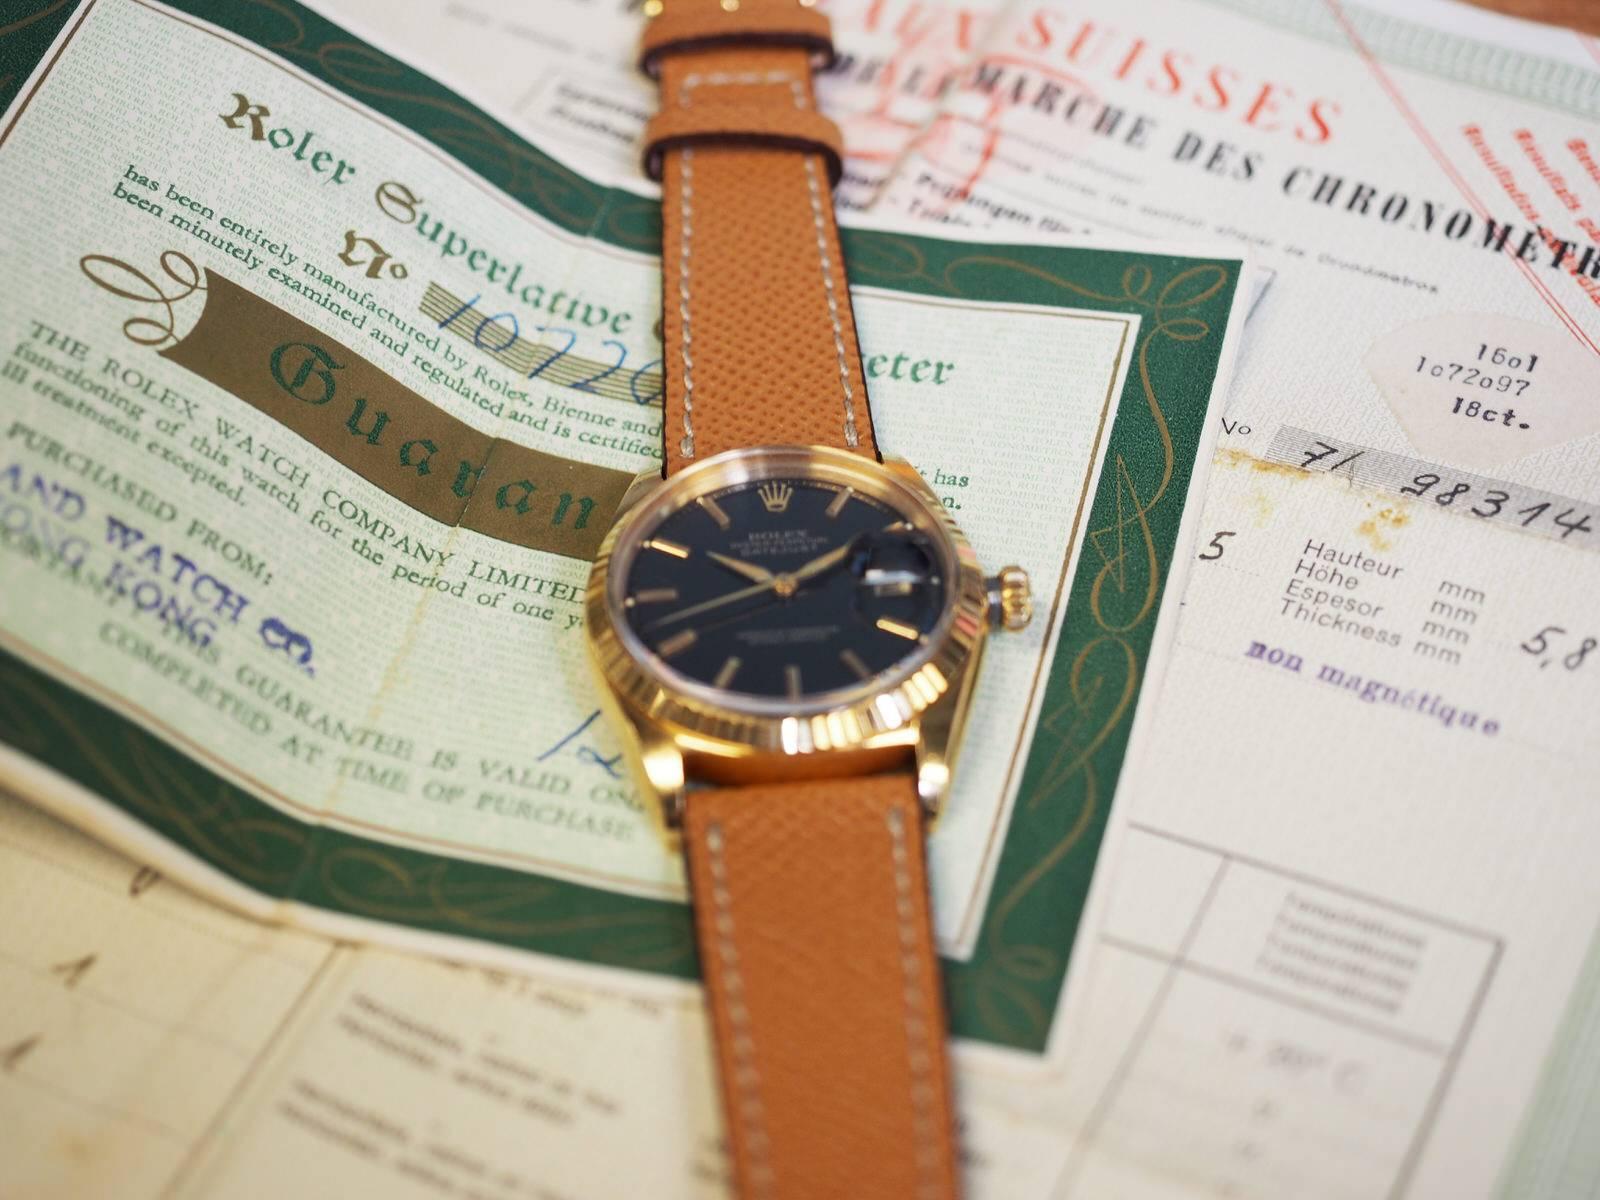 For sale is this Gold Rolex Datejust Ref. 1601 with original papers.